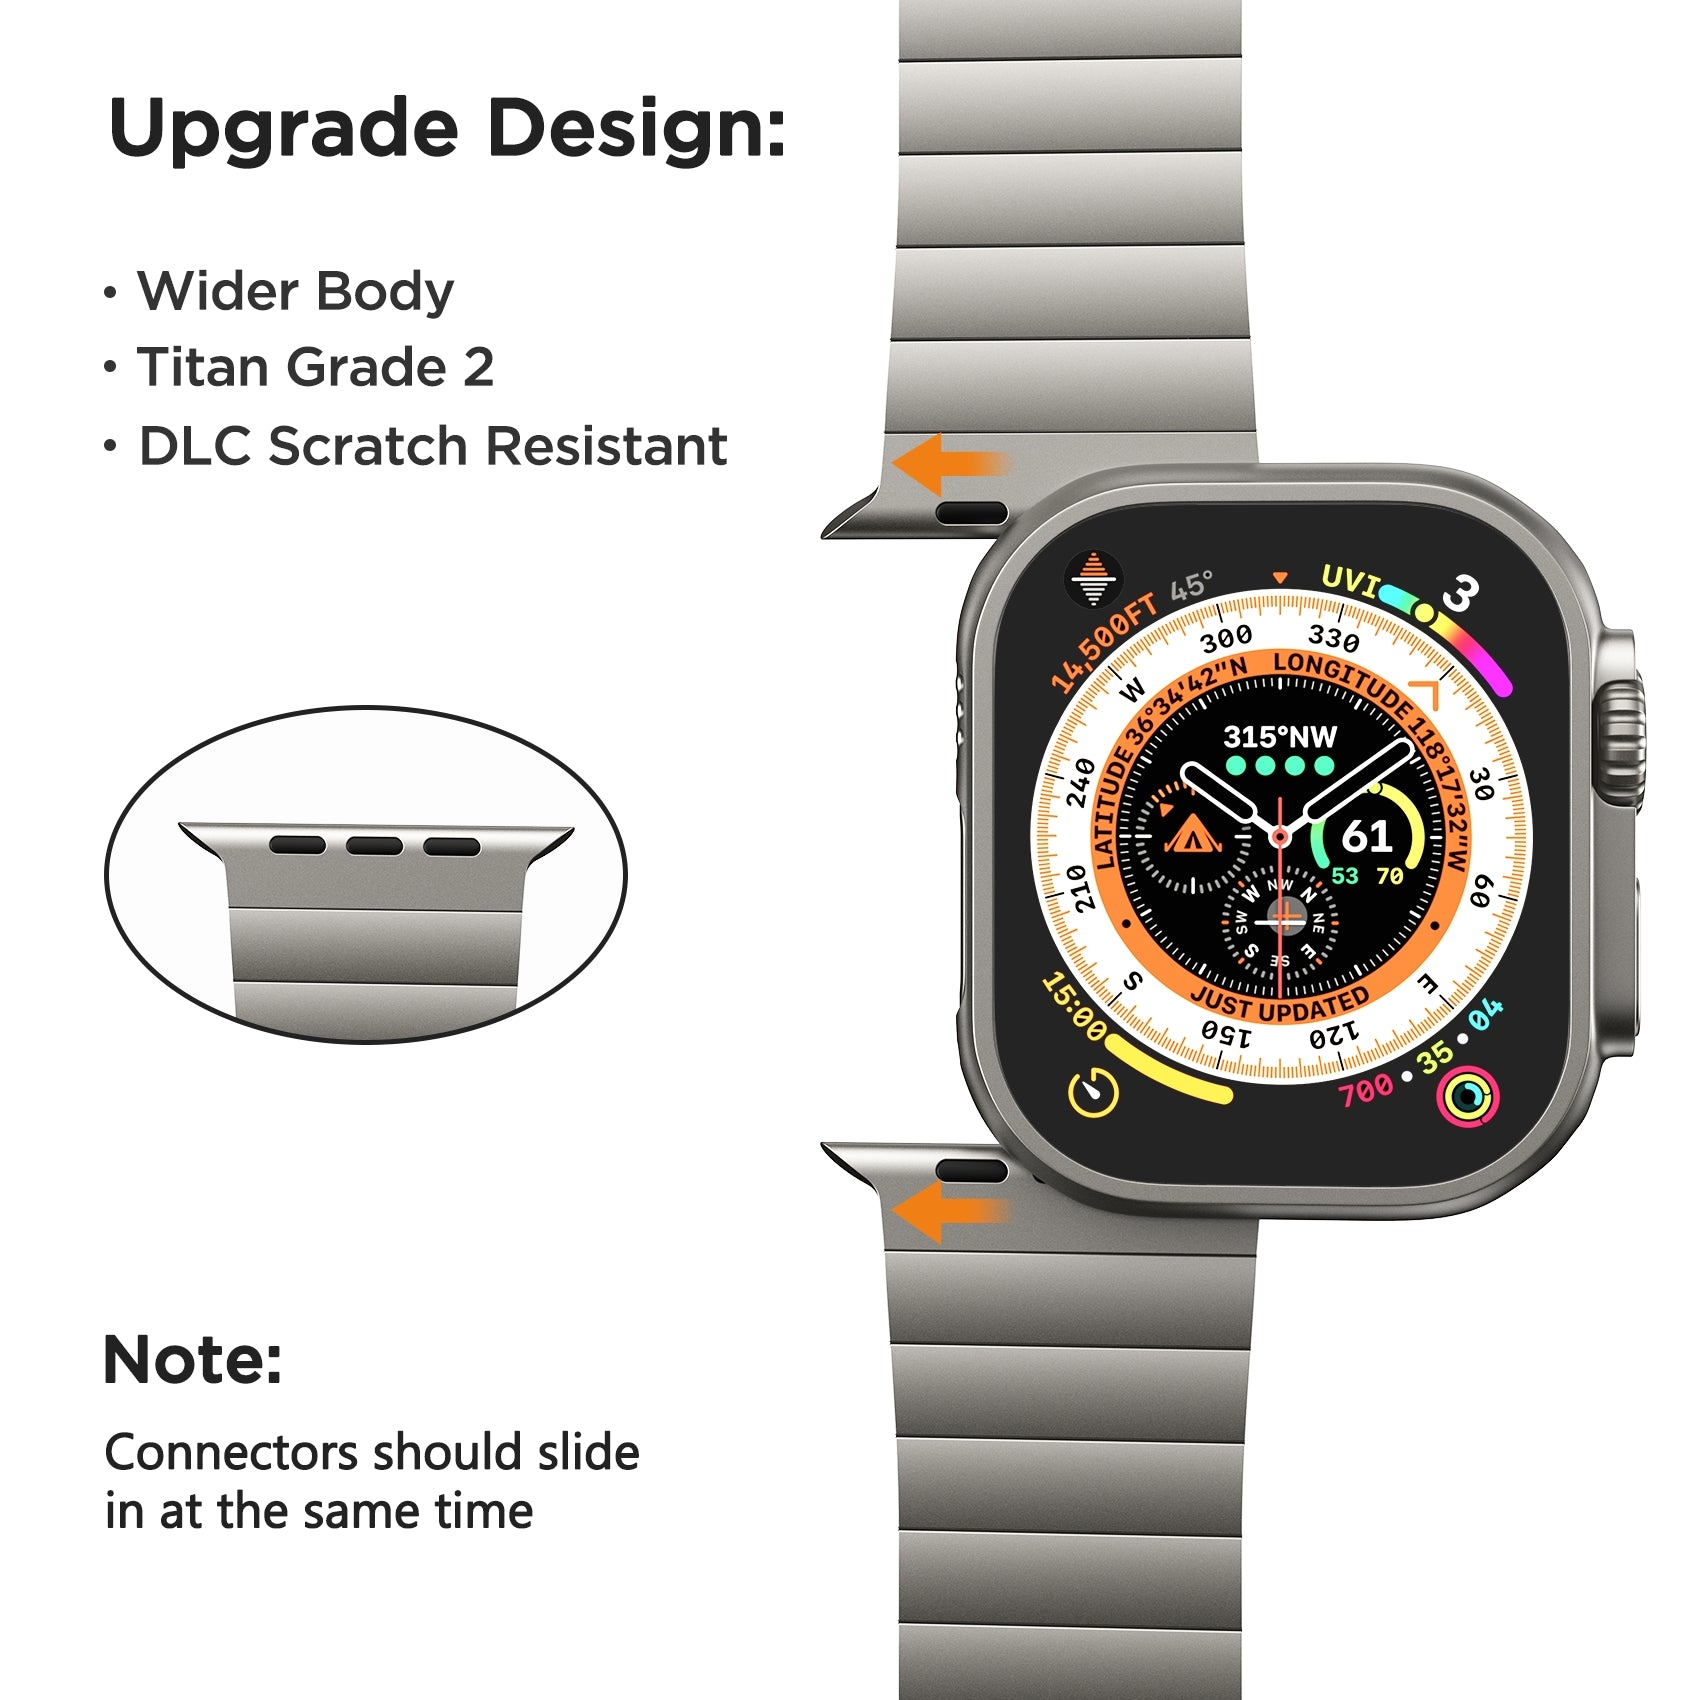 LULULOOK Band for Apple Watch Ultra, 49MM Titanium Metal Band for iWatch  [𝘿𝙇𝘾-𝙎𝙘𝙧𝙖𝙩𝙘𝙝 𝙍𝙚𝙨𝙞𝙨𝙩𝙖𝙣𝙩 𝙋𝙧𝙤𝙘𝙚𝙨𝙨]- Titanium Color  for Big Wrist